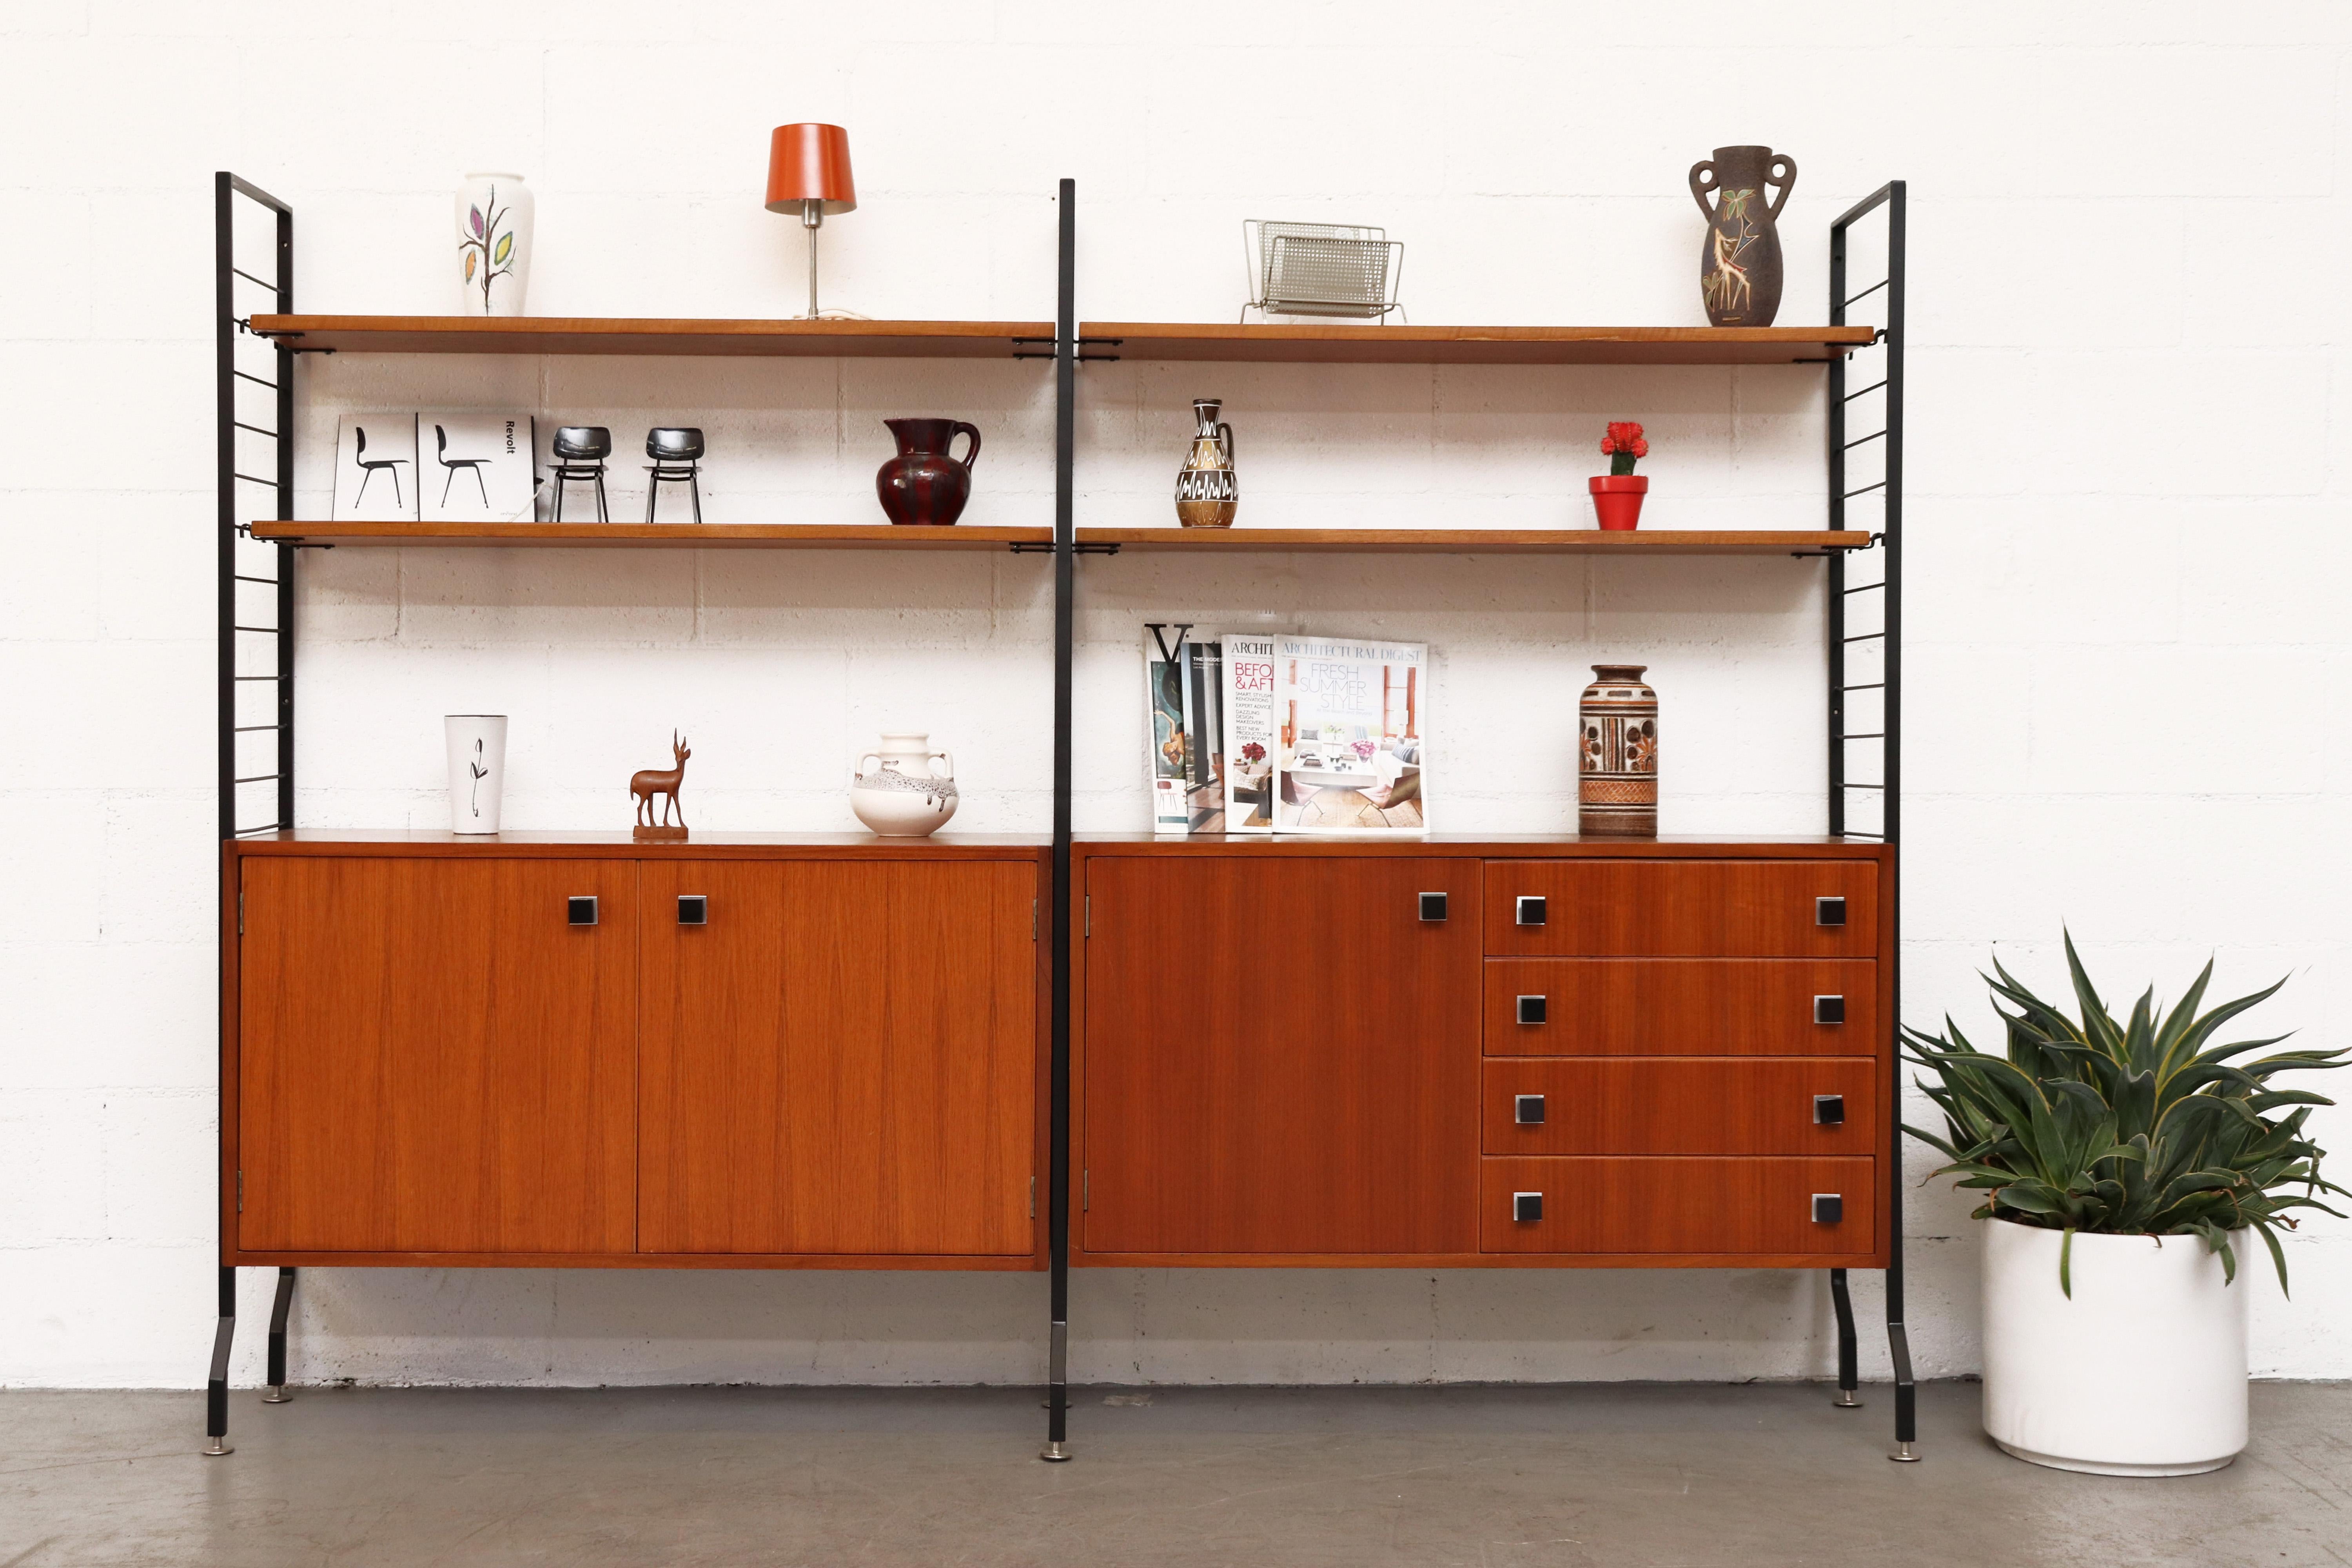 Handsome midcentury teak wall unit. Fantastic storage and shelving. Cabinets in original condition with new made shelving. Frames and cabinets have some signs of wear consistent with age and use.